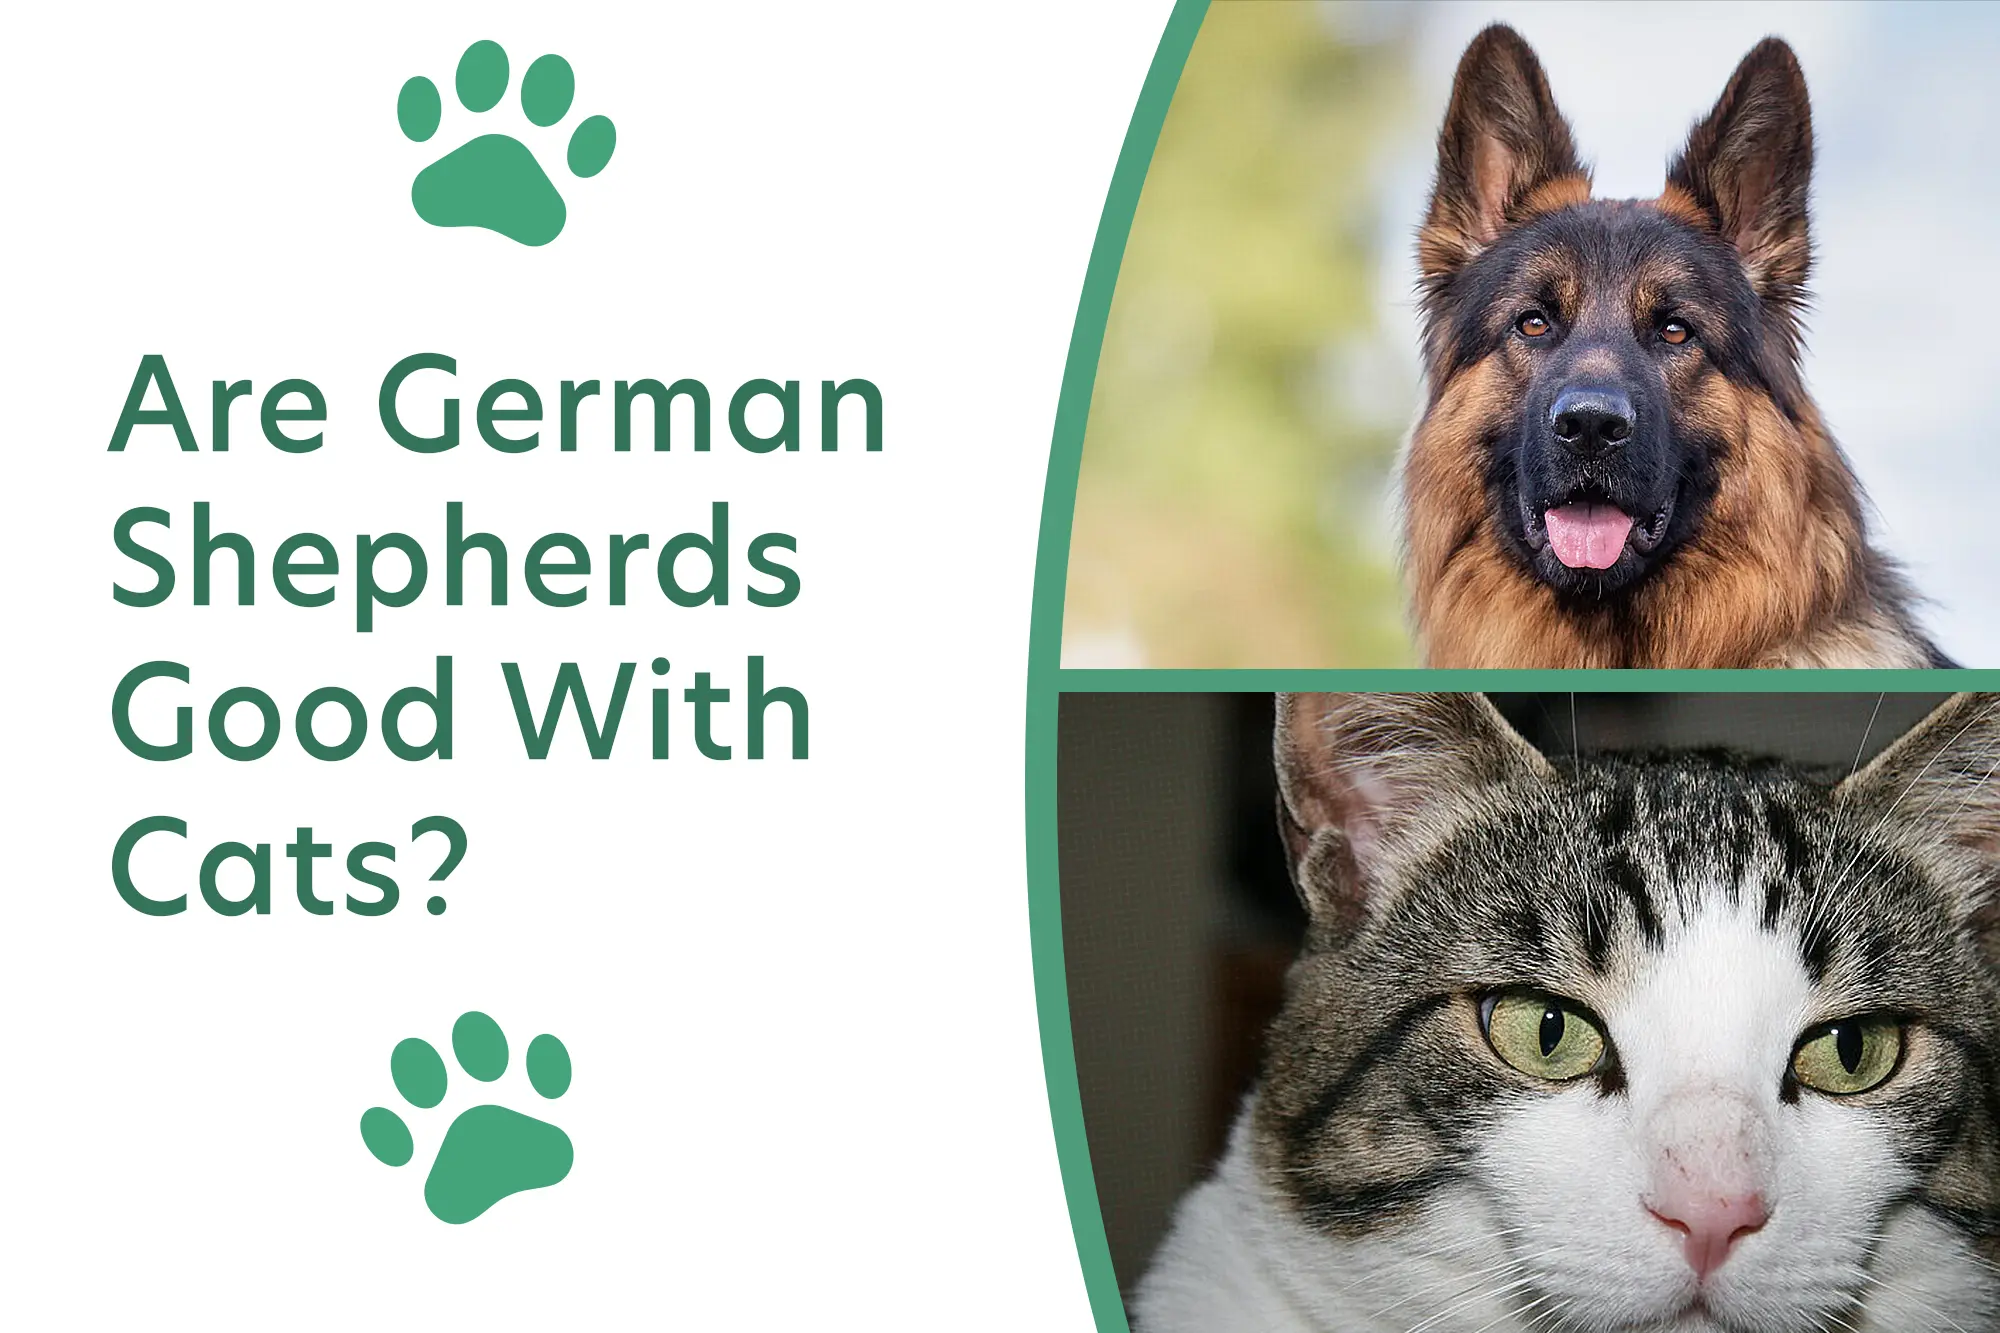 Are German Shepherds Good With Cats?